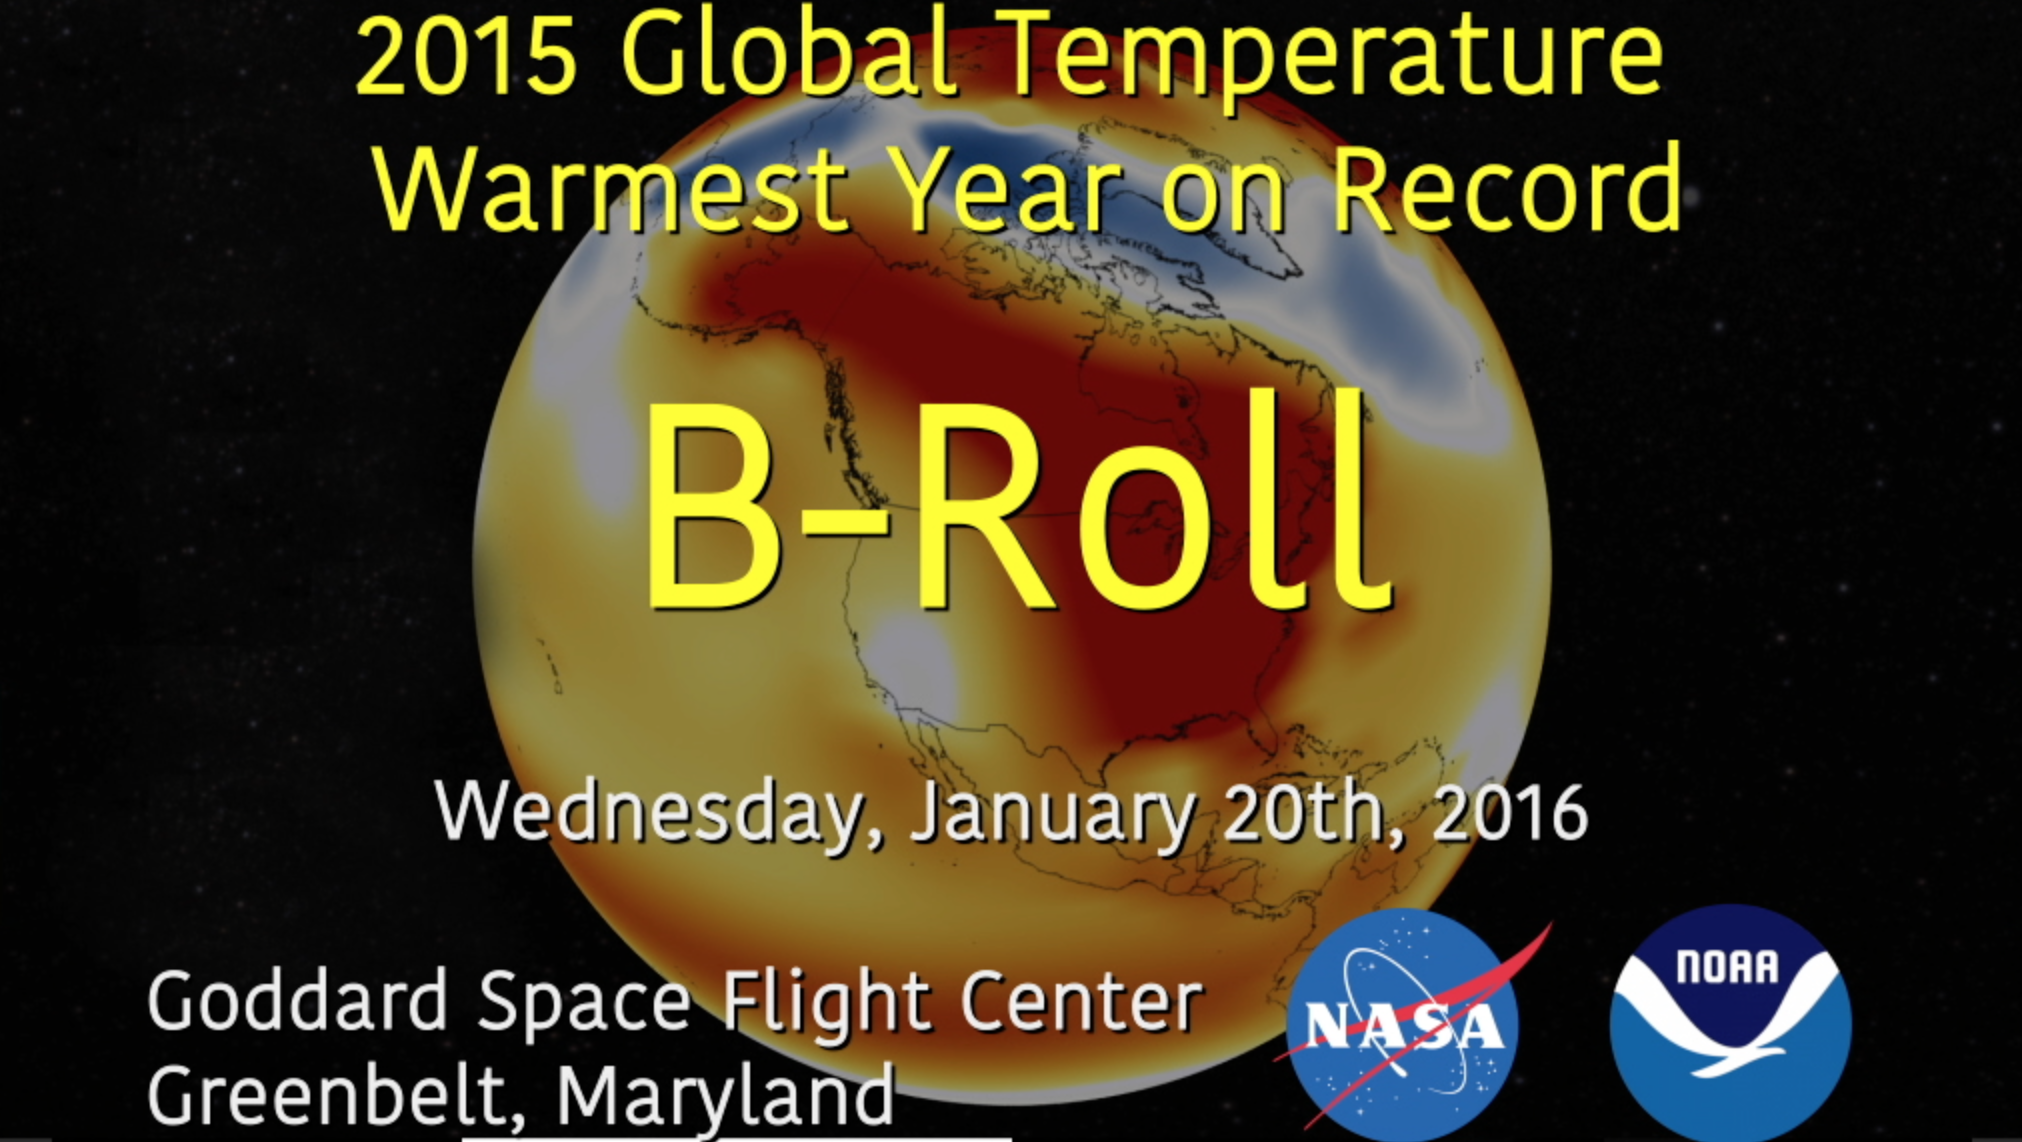 Preview Image for NASA/NOAA 2015 Global Temperature Live Shots